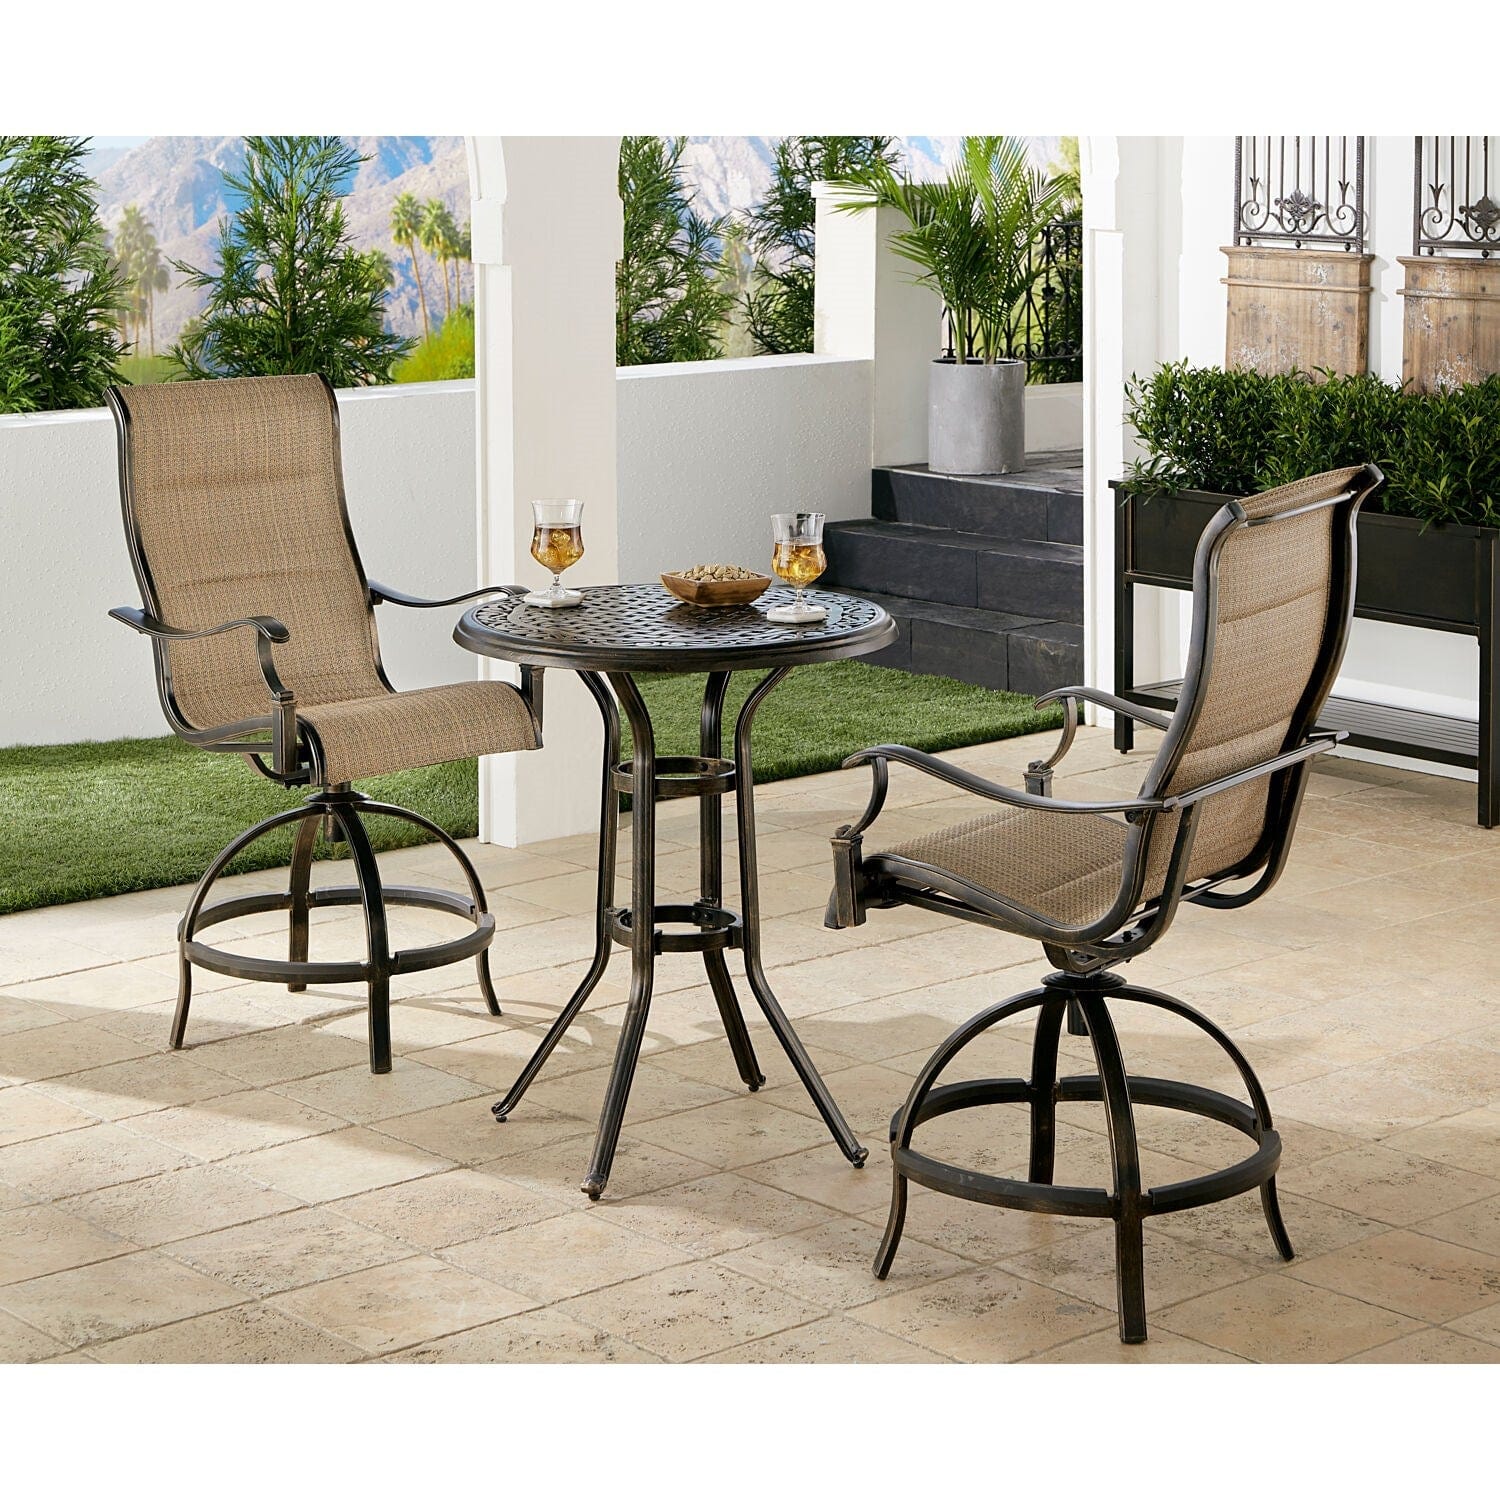 Hanover Bistro Set Hanover Traditions 3-Piece Aluminum Frames High-Dining Bistro Set in Tan with 2 Padded Swivel Counter-Height Chairs and 30-in. Cast-top Table - TRADDN3PCPDBR-TAN